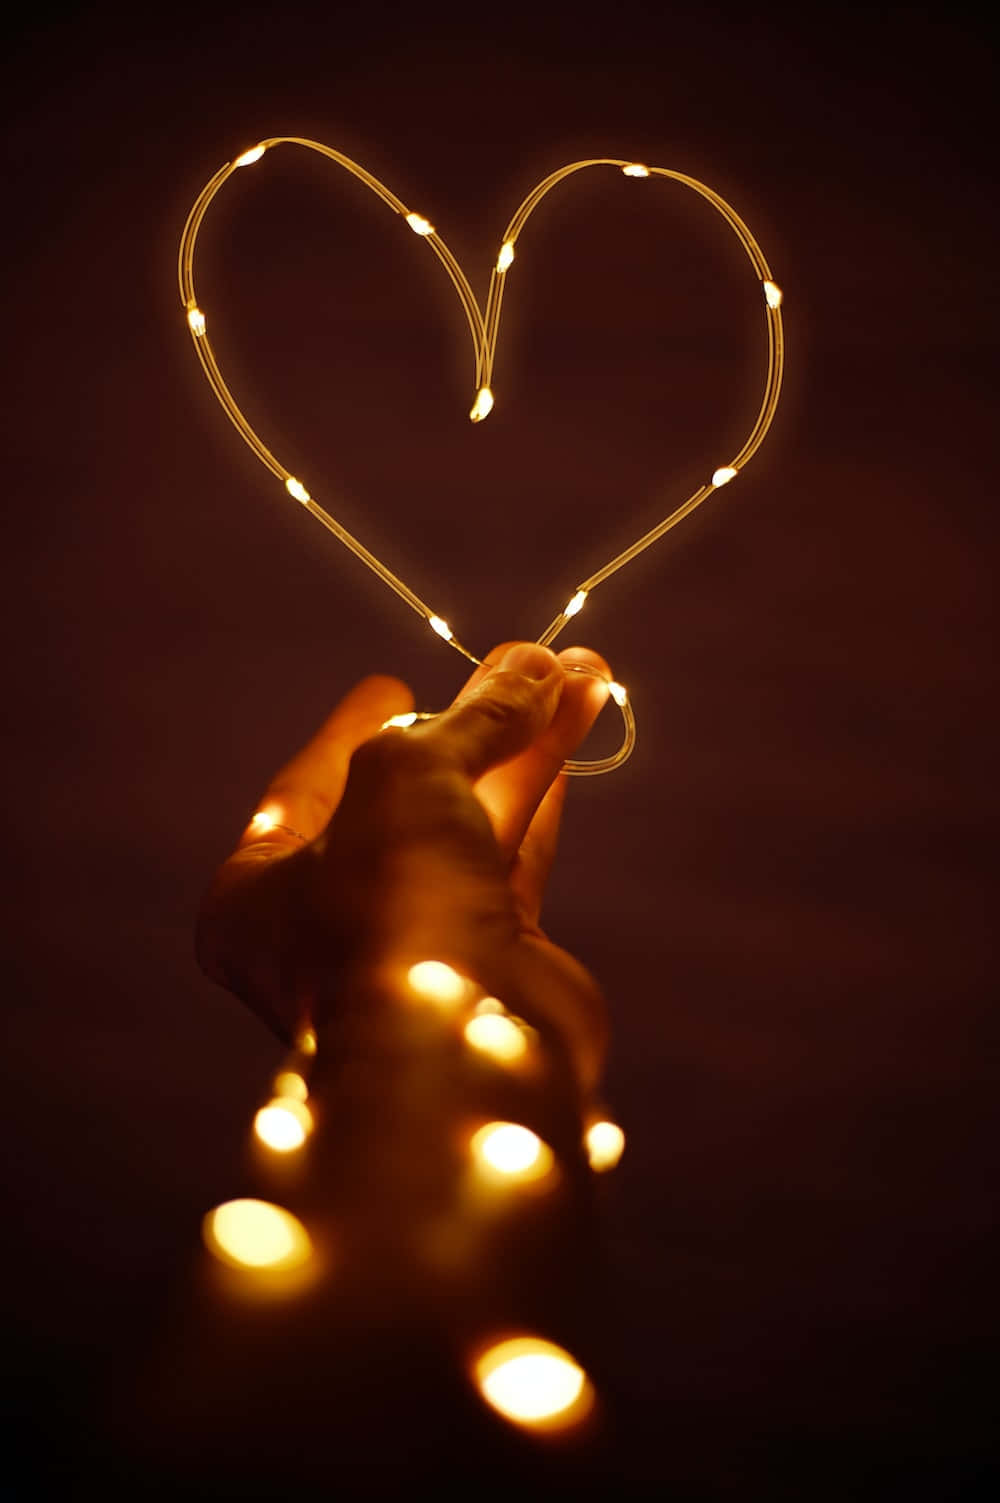 A Person Holding A Heart Shape With Lights In It